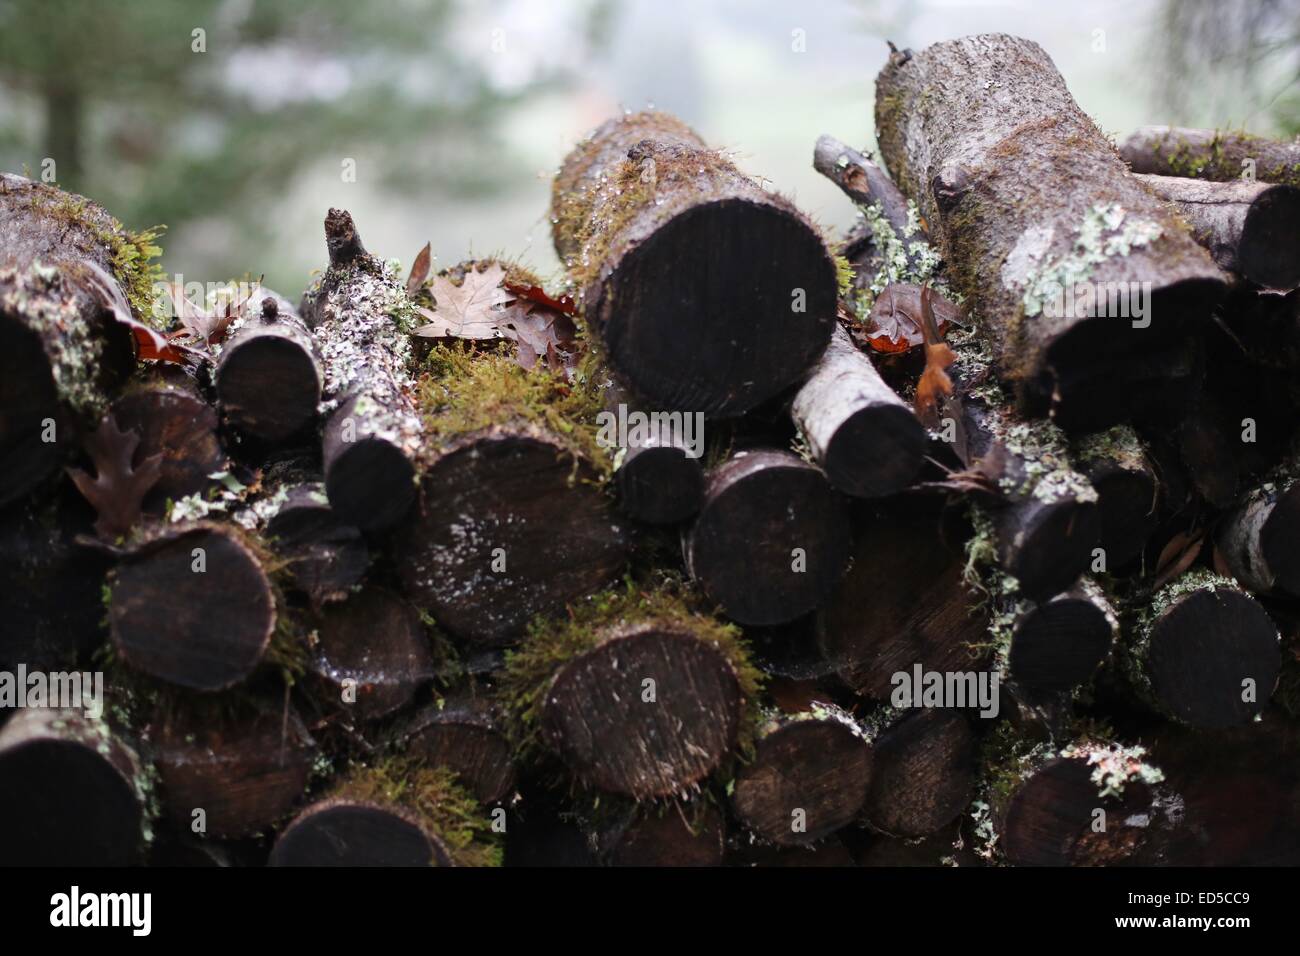 A stack of wet and mossy firewood. Stock Photo